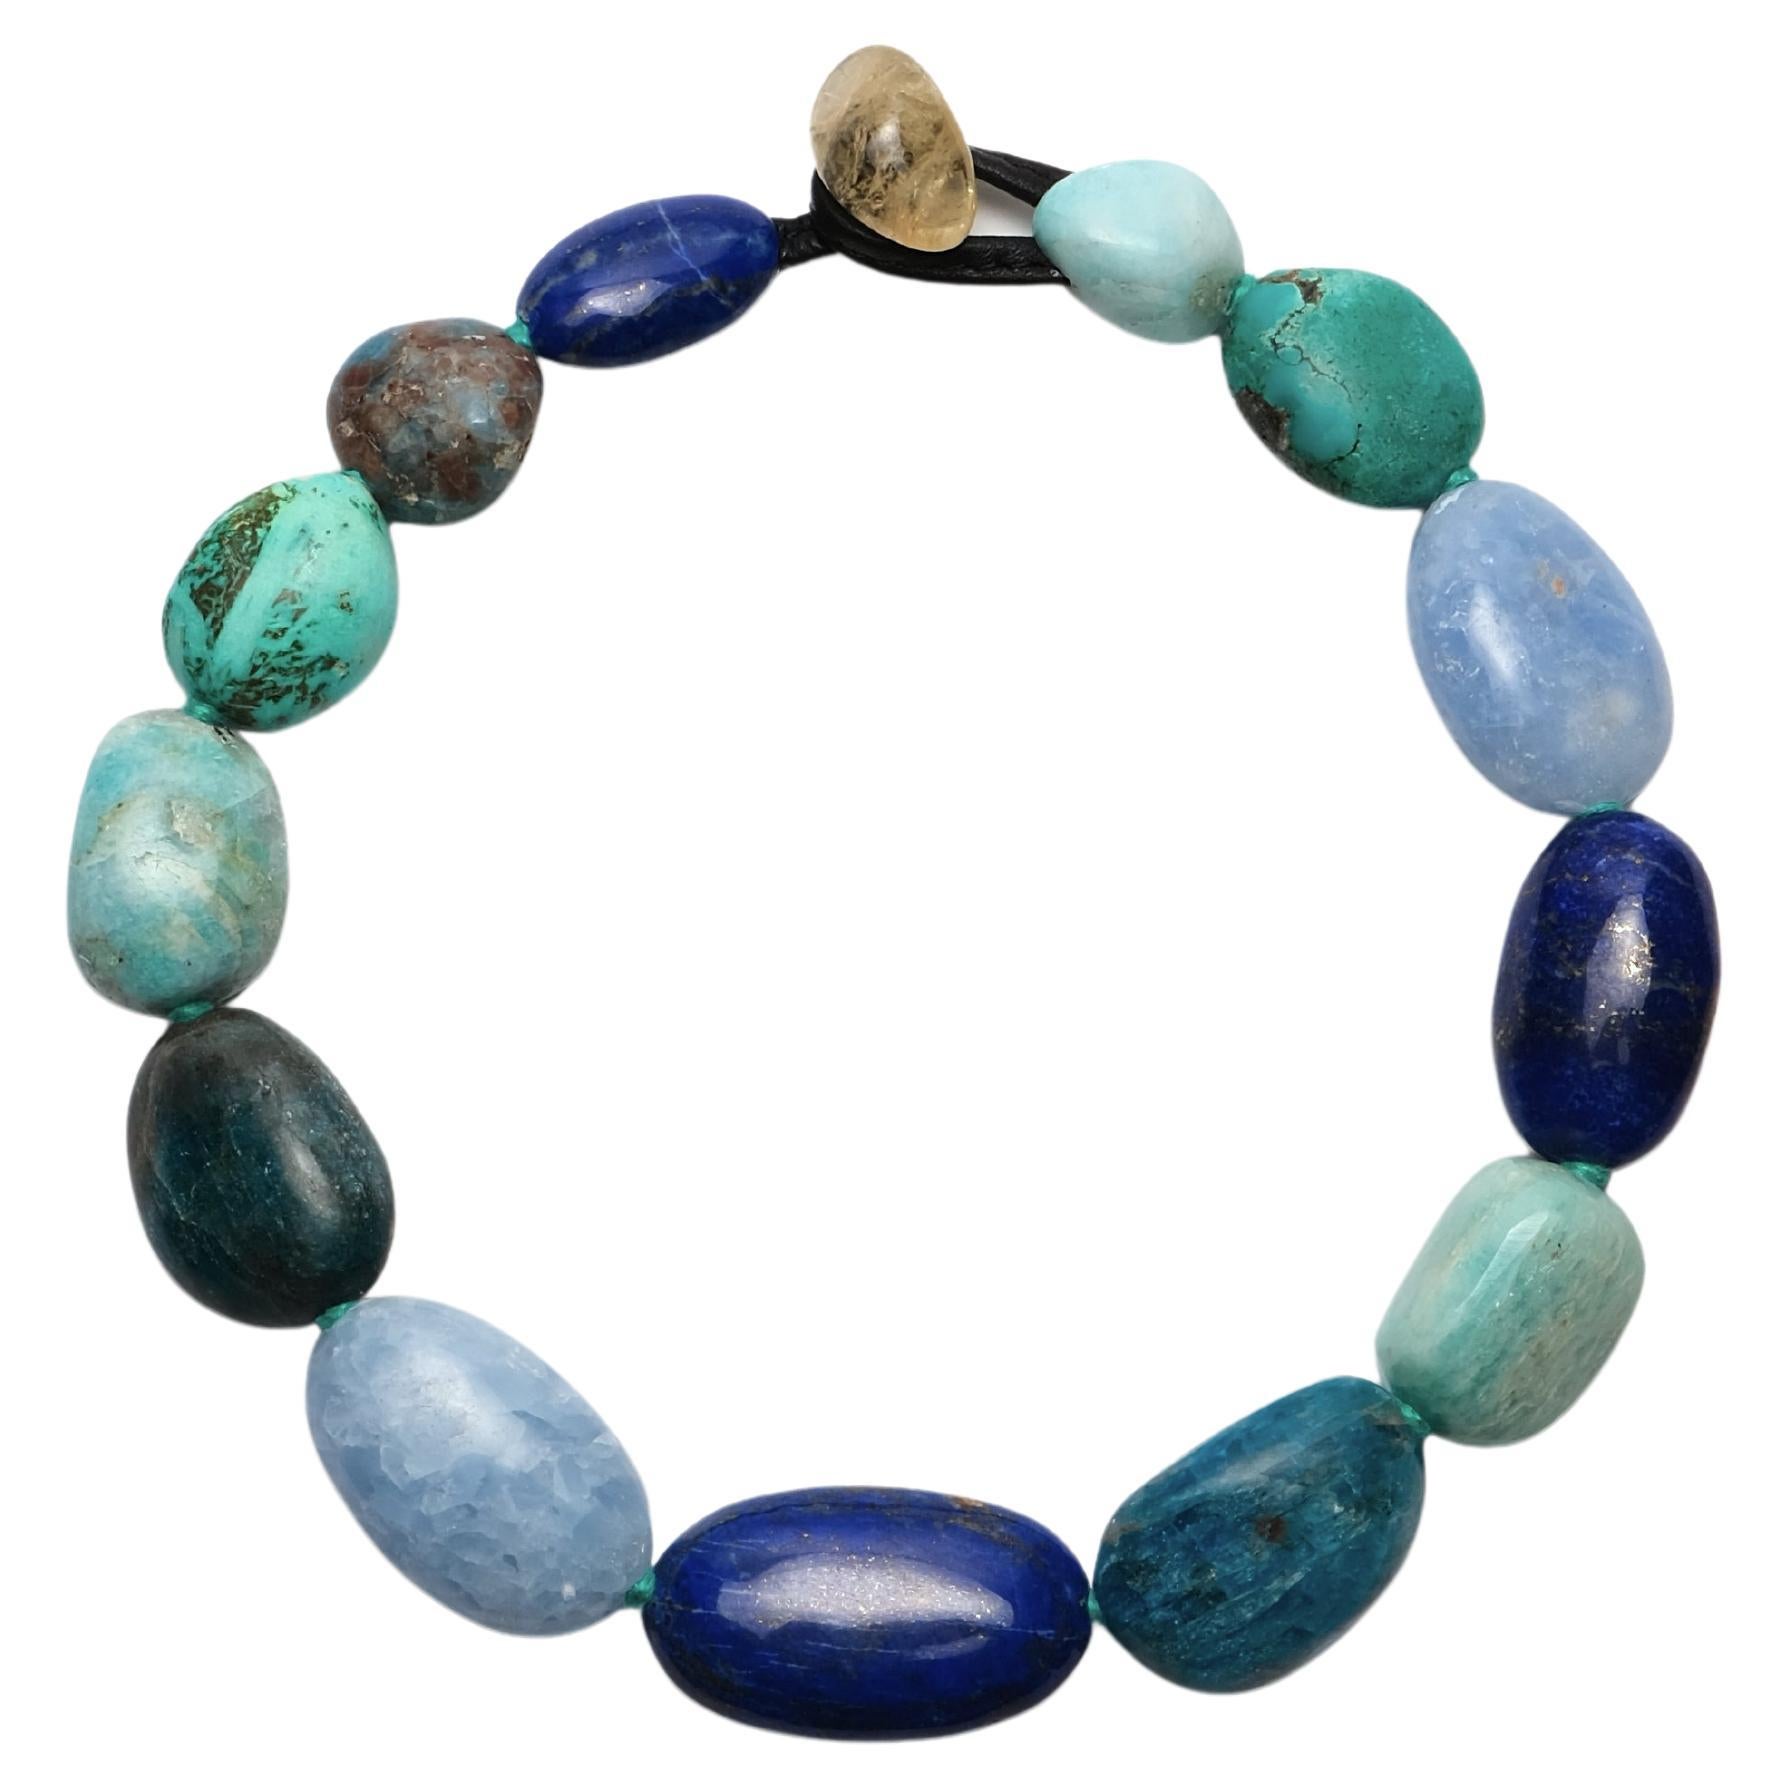 One-of-a-kind Necklace in Mixed Stones from the Danish Brand